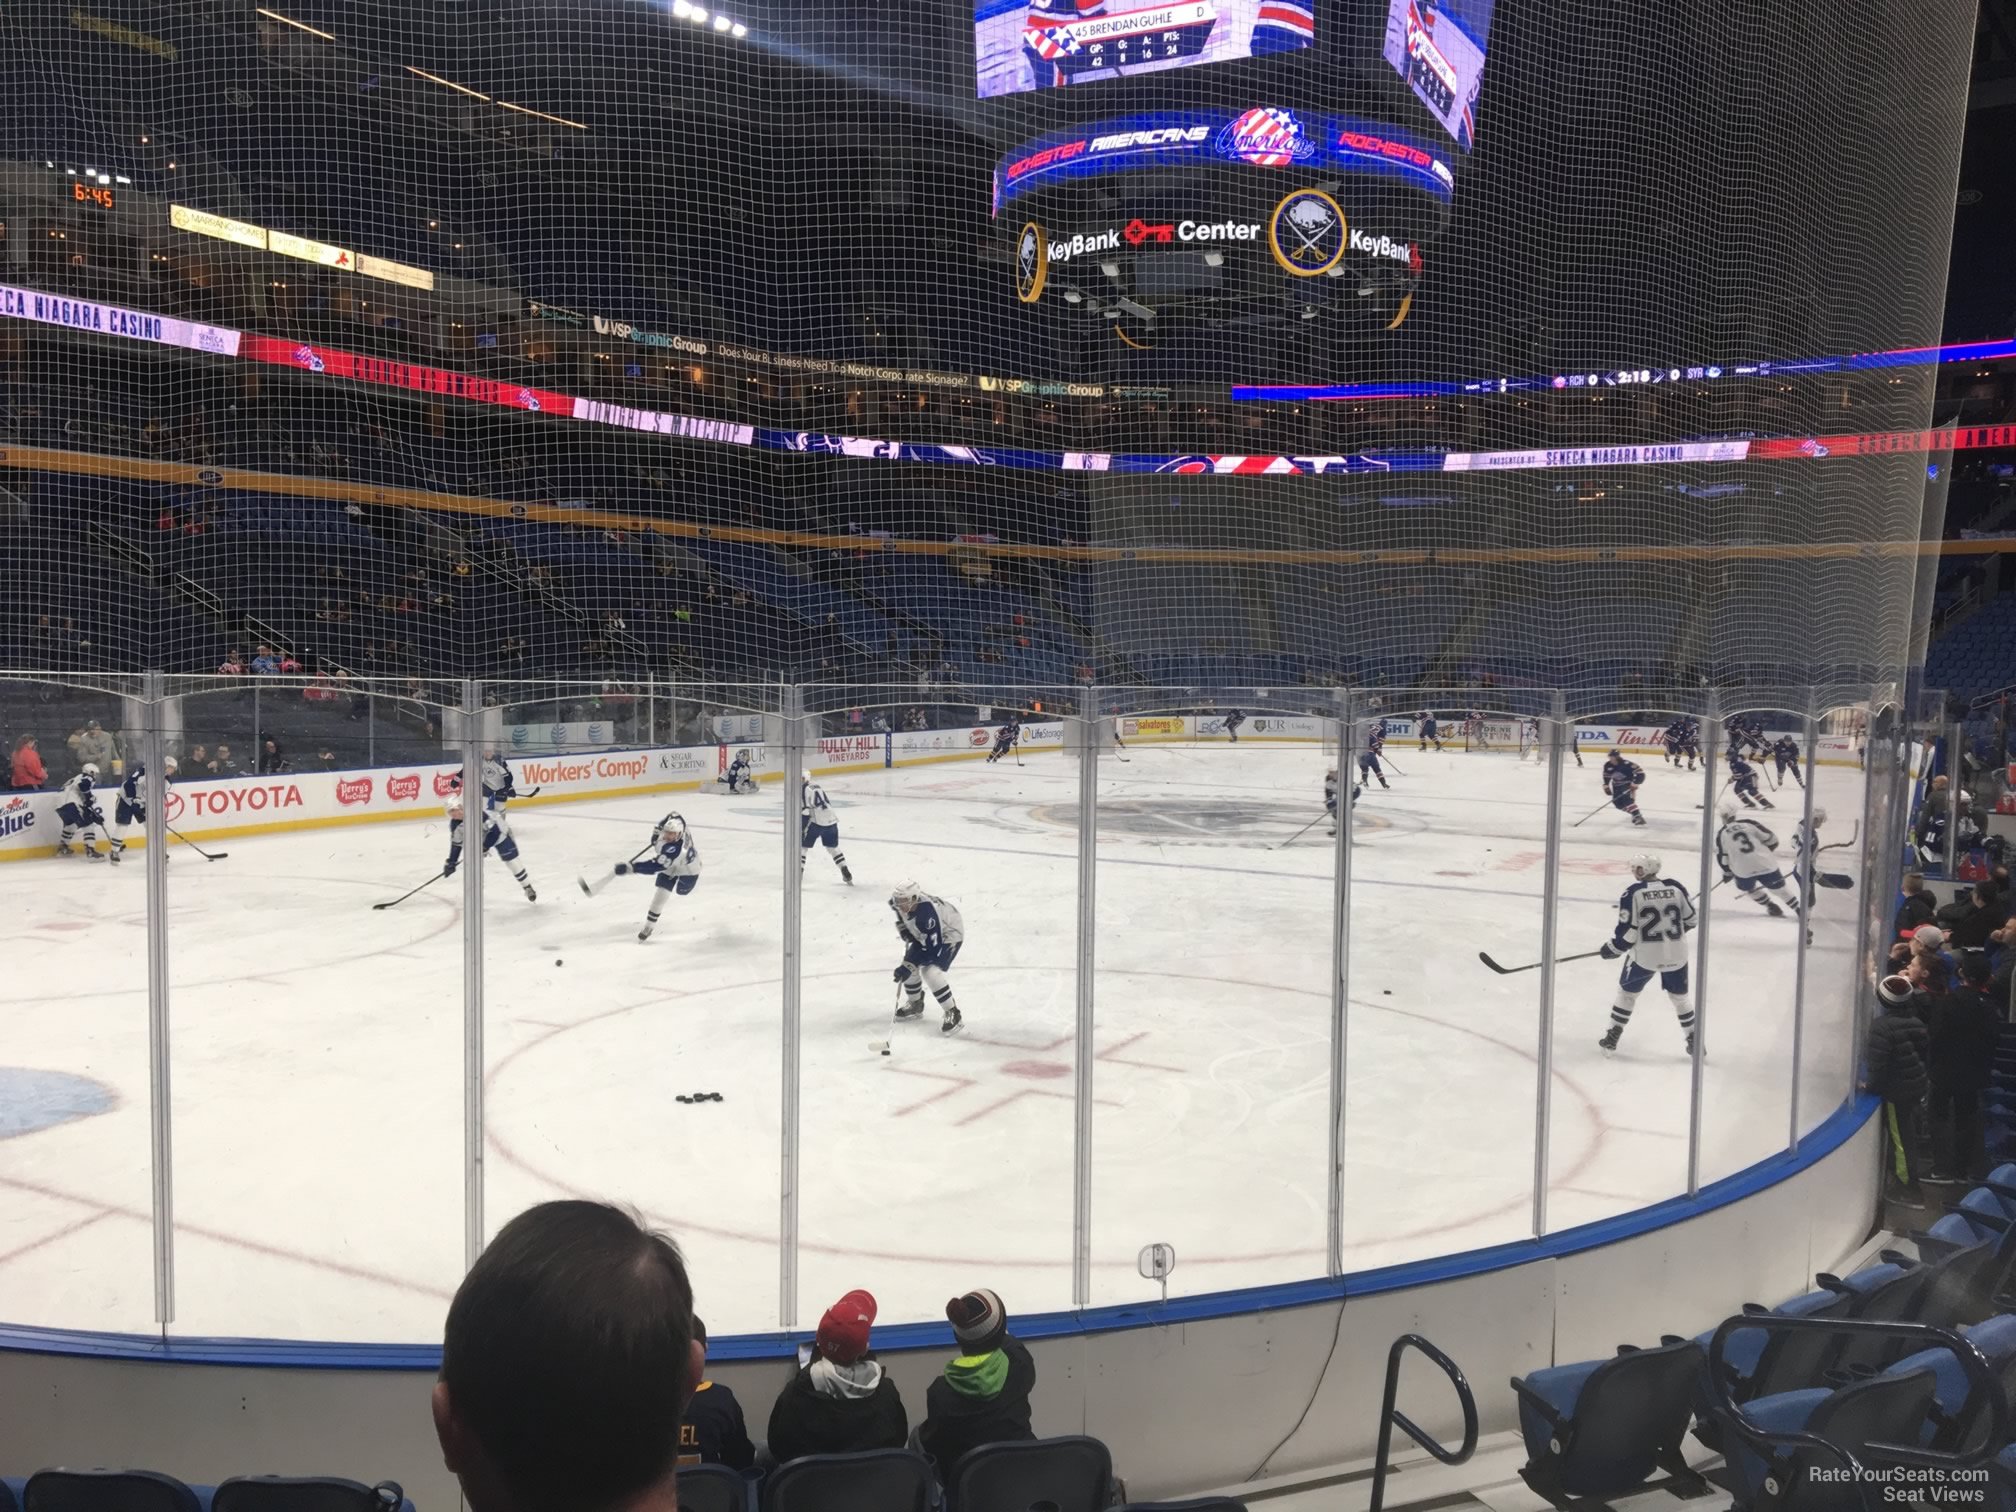 section 109, row 4 seat view  for hockey - keybank center